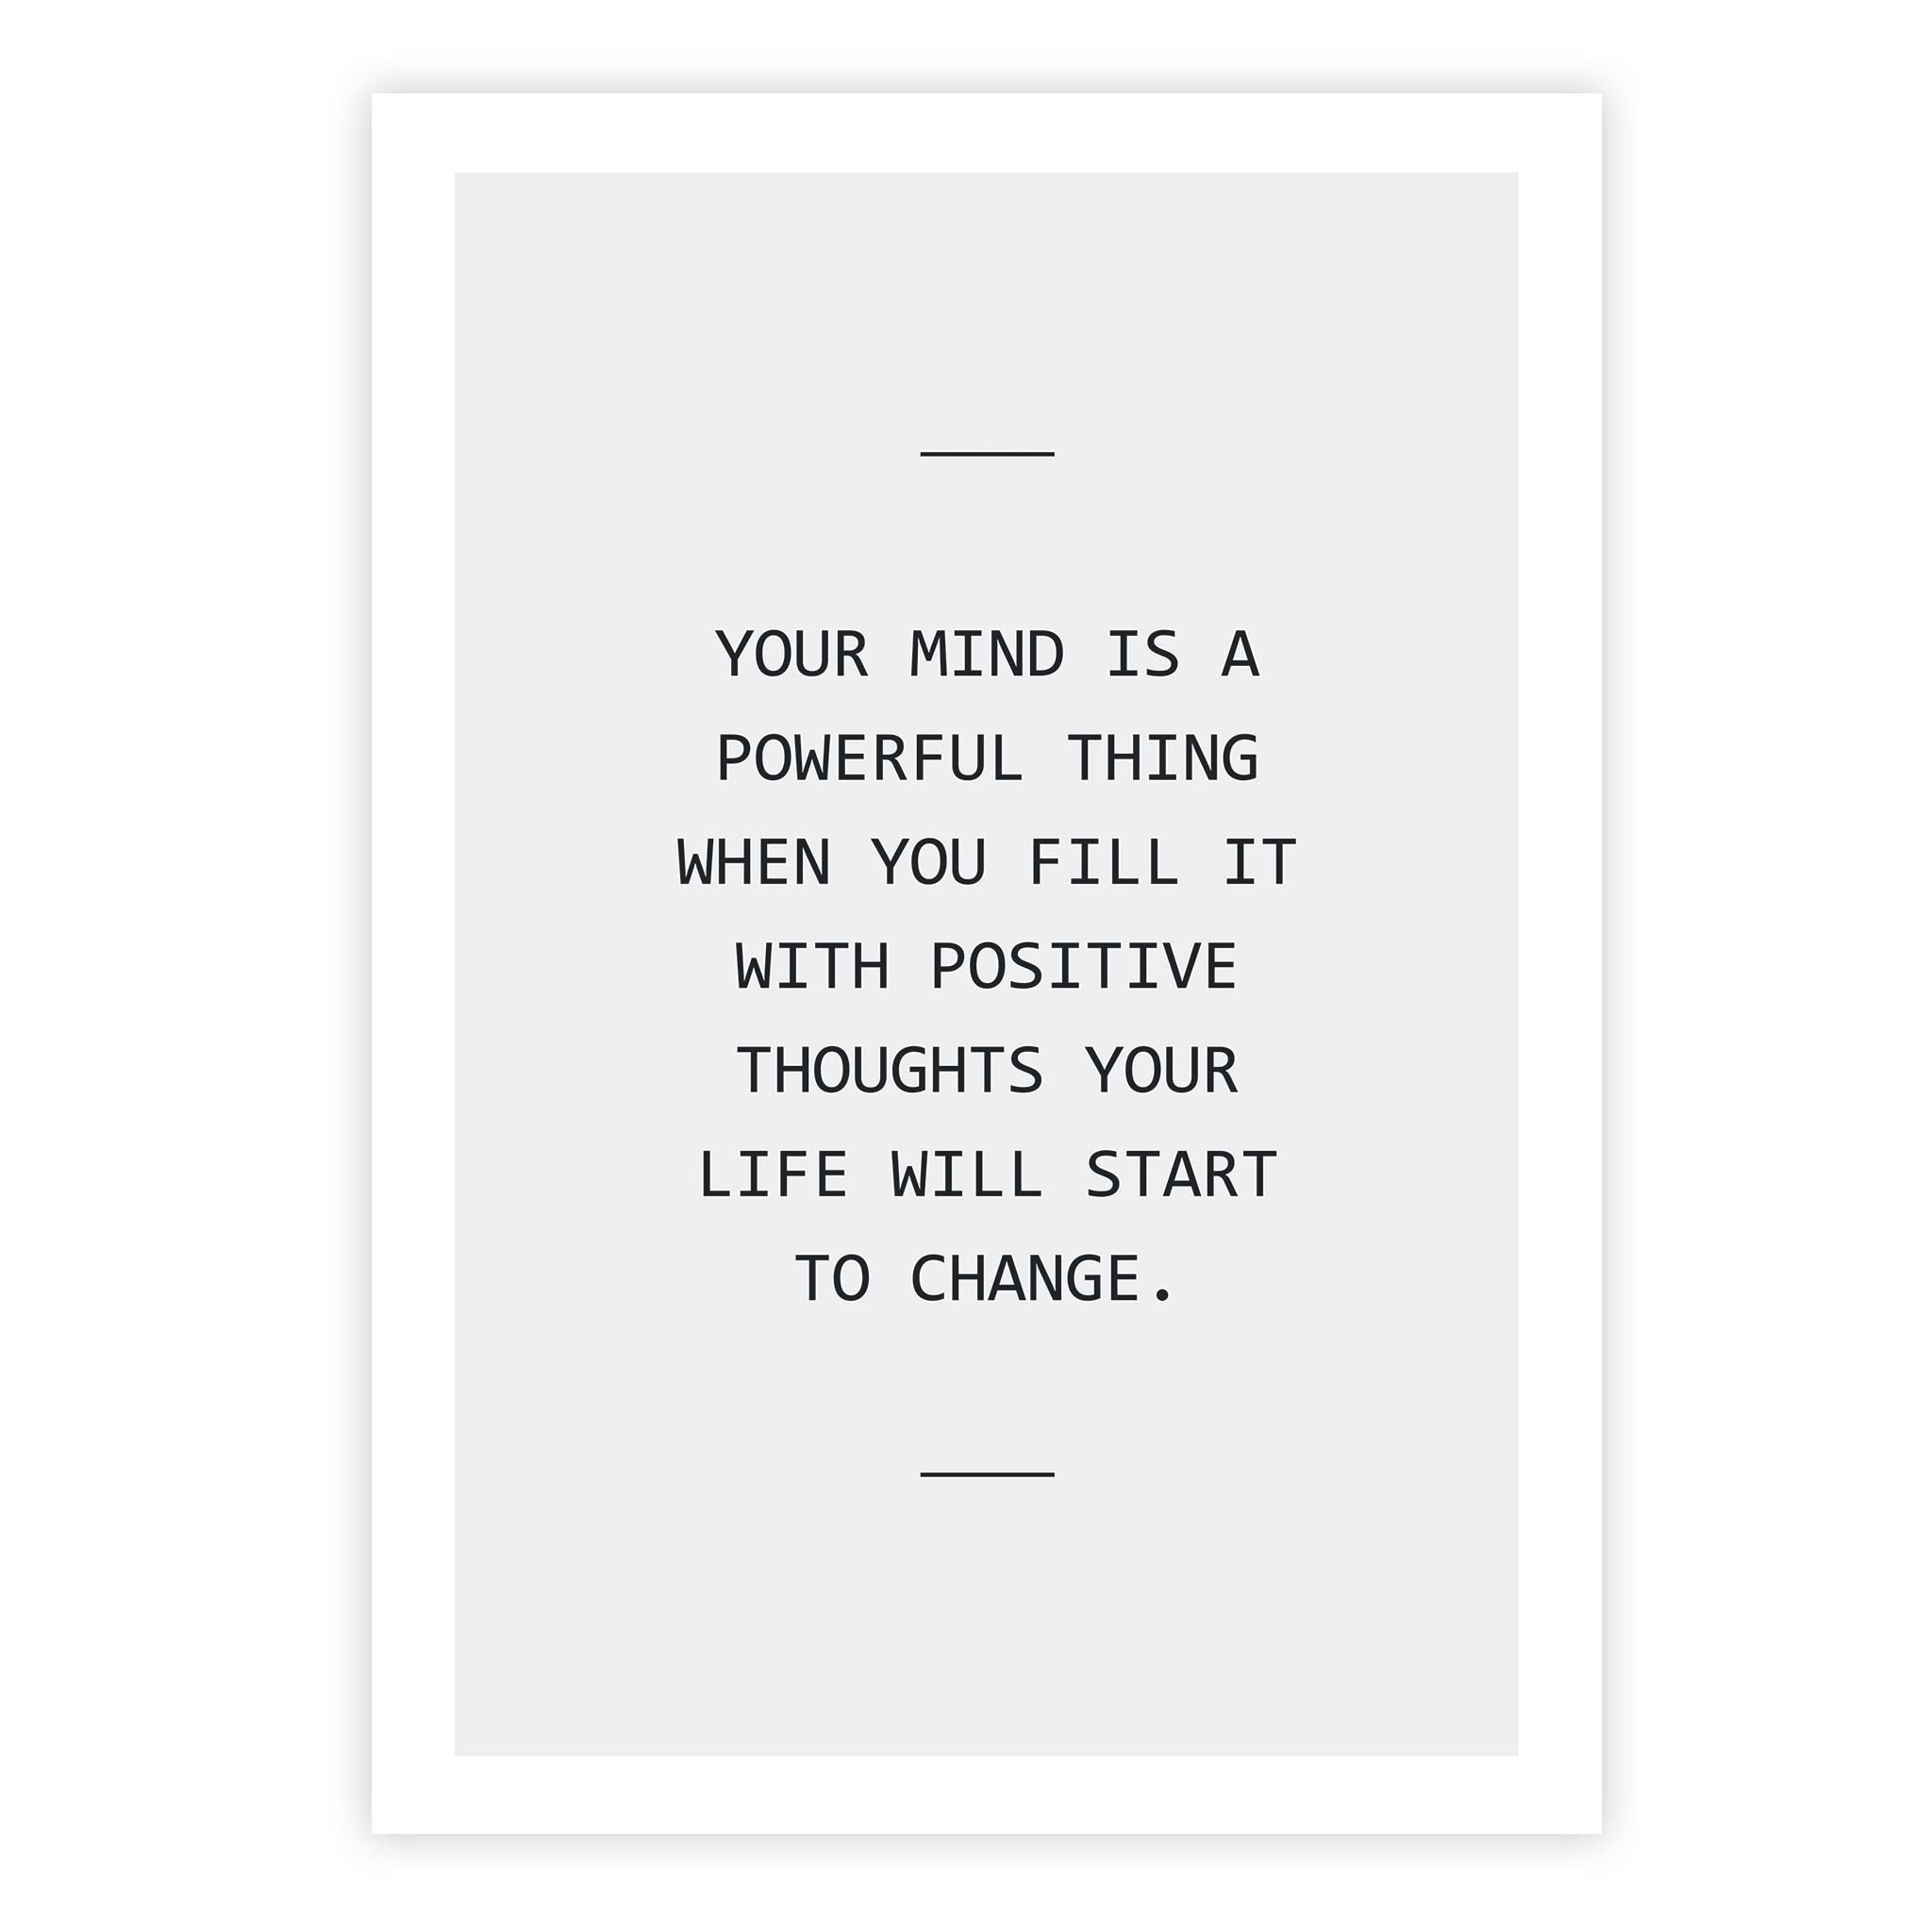 Your mind is a powerful thing when you fill it with positive thoughts your life will start to change